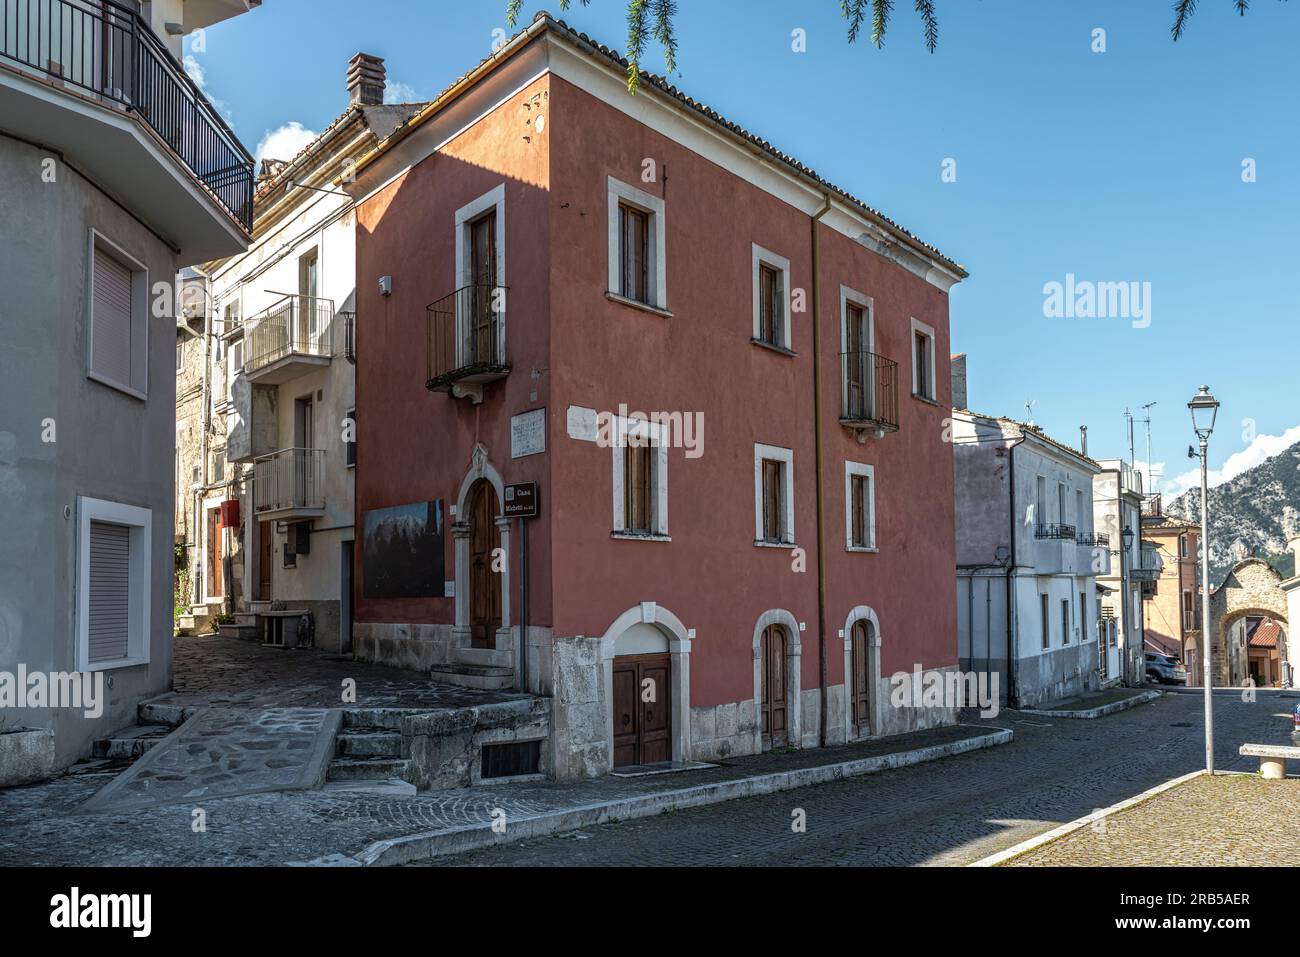 The birthplace of the realist photographer and painter Francesco Paolo Michetti. The Art Nouveau building is now a house museum. Tocco da Casauria Stock Photo